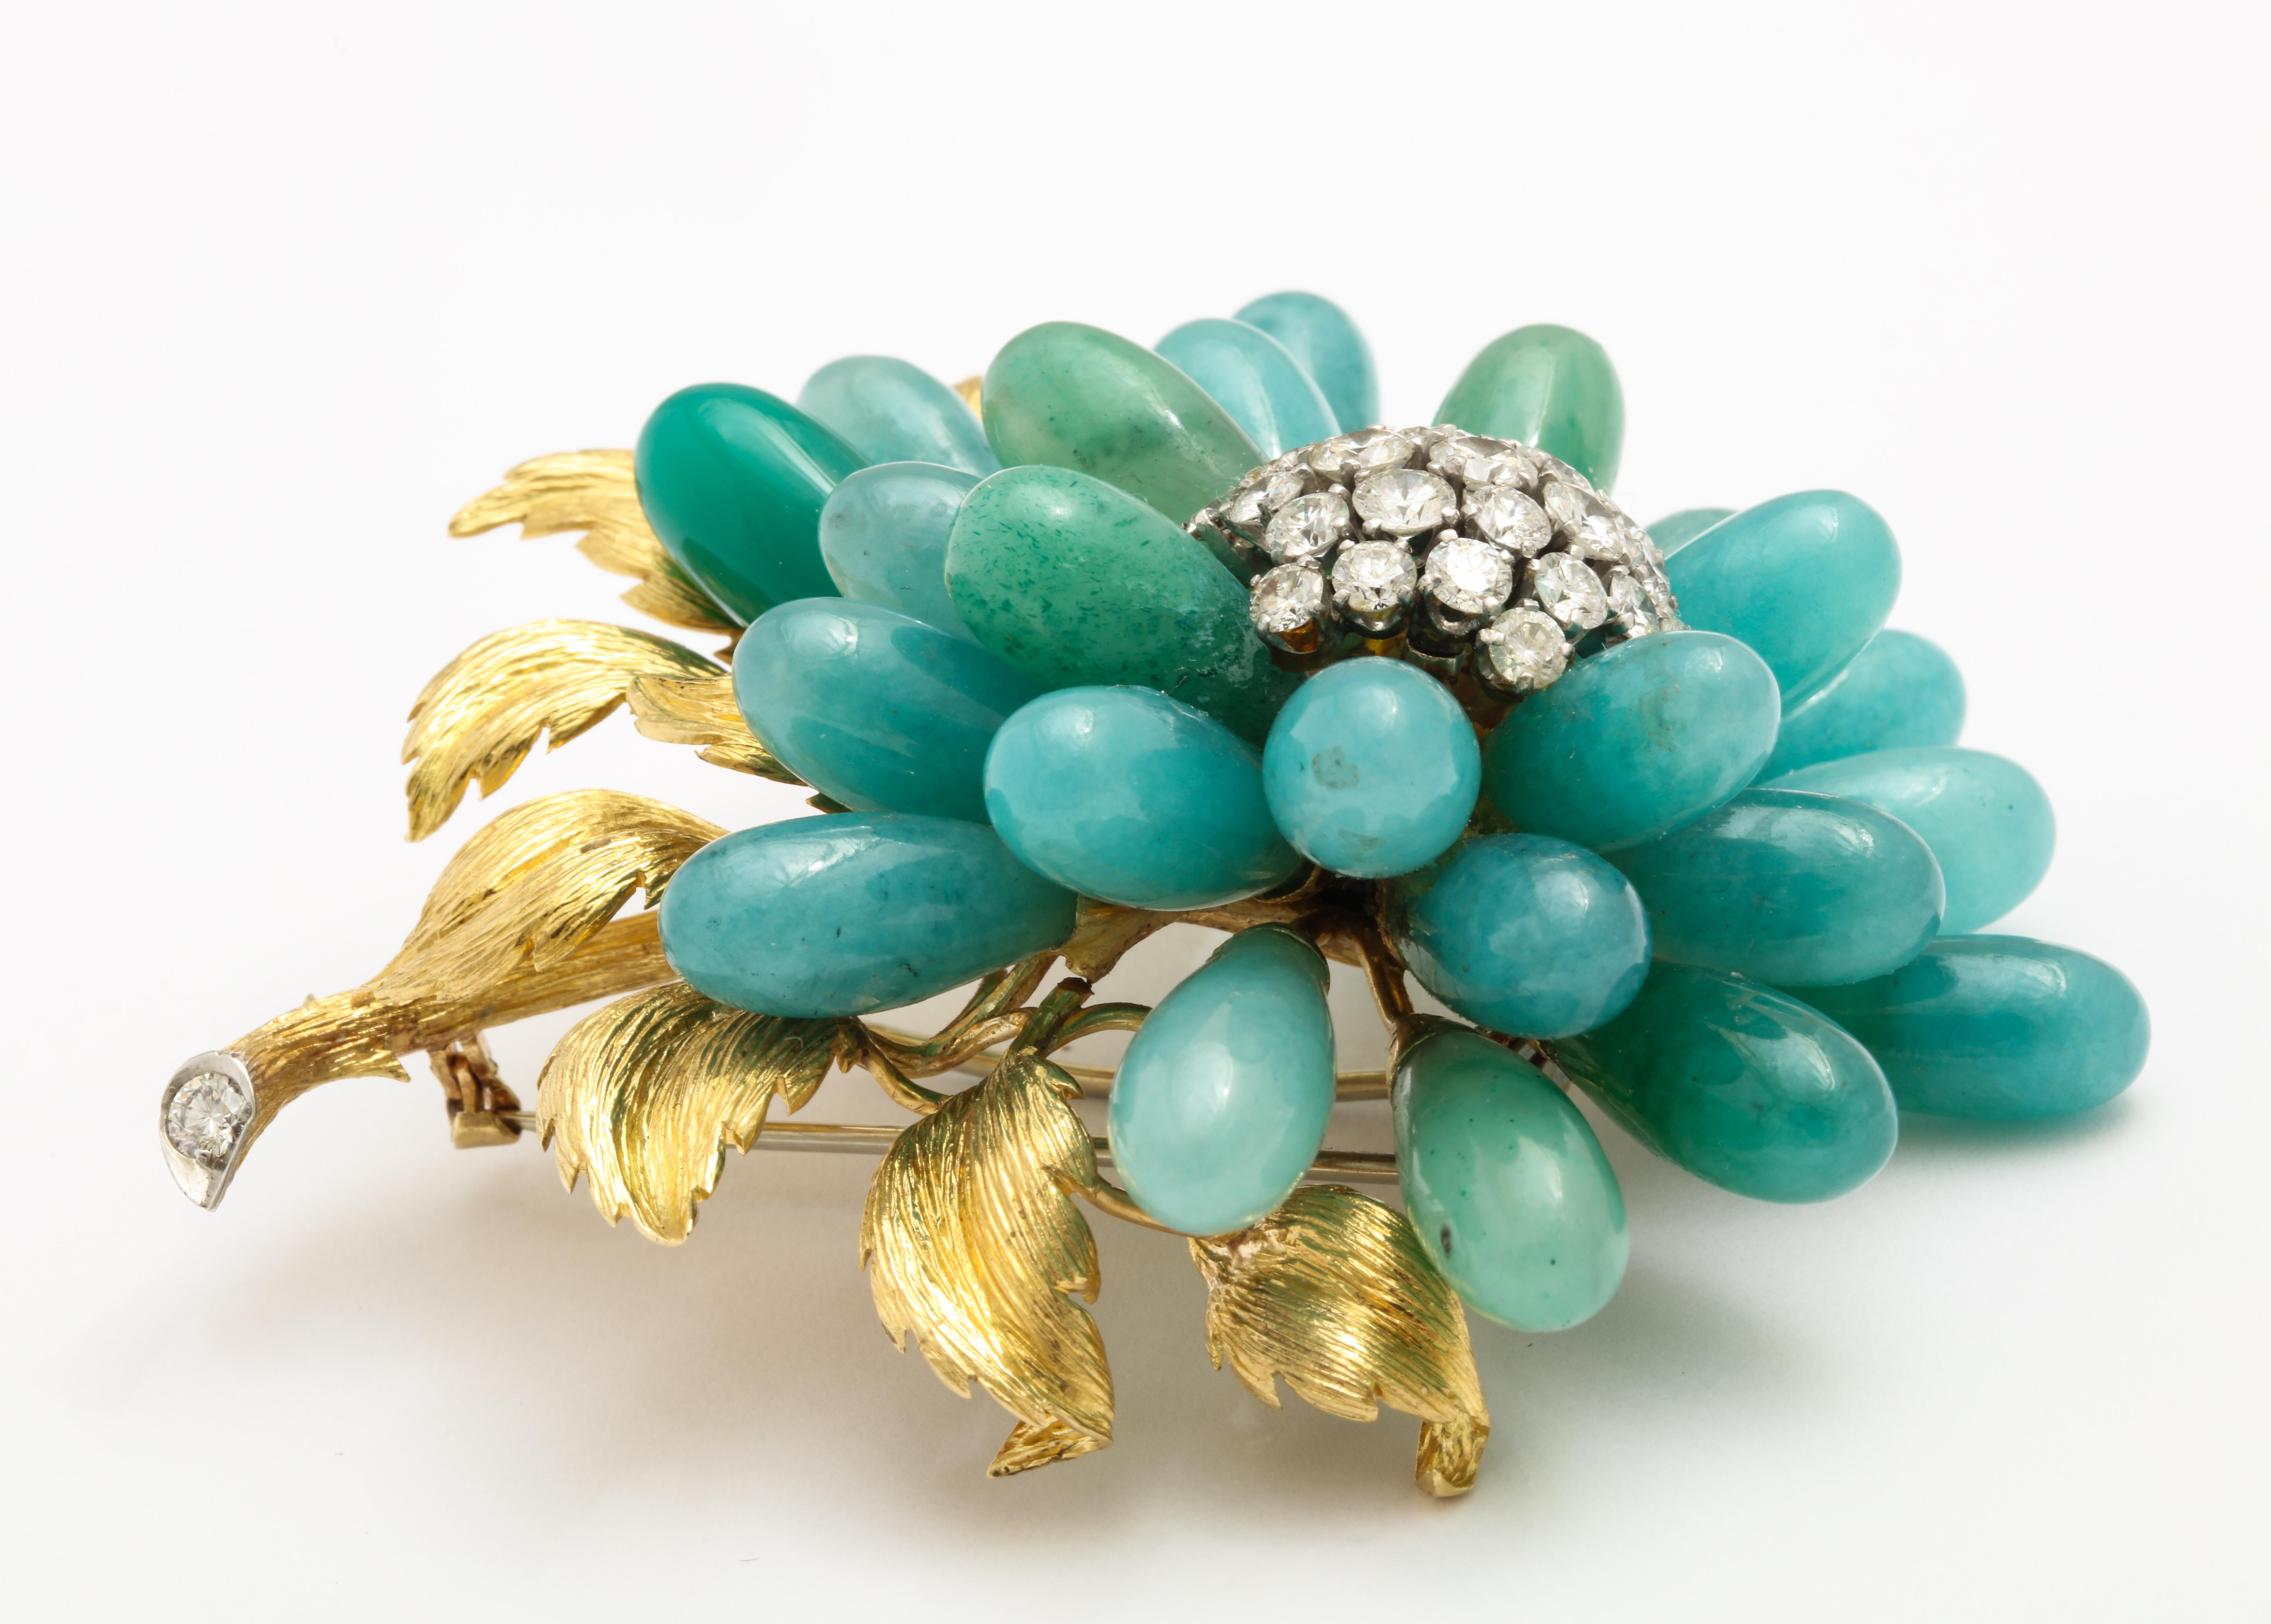 An extraordinary brooch by an American icon in jewelry design, David Webb.  This pin has volume, dimension and a fabulous mix of texture and color.  Beautifully hand finished florentine gold leaves, and masterfully arranged jadeite and chrysoprase